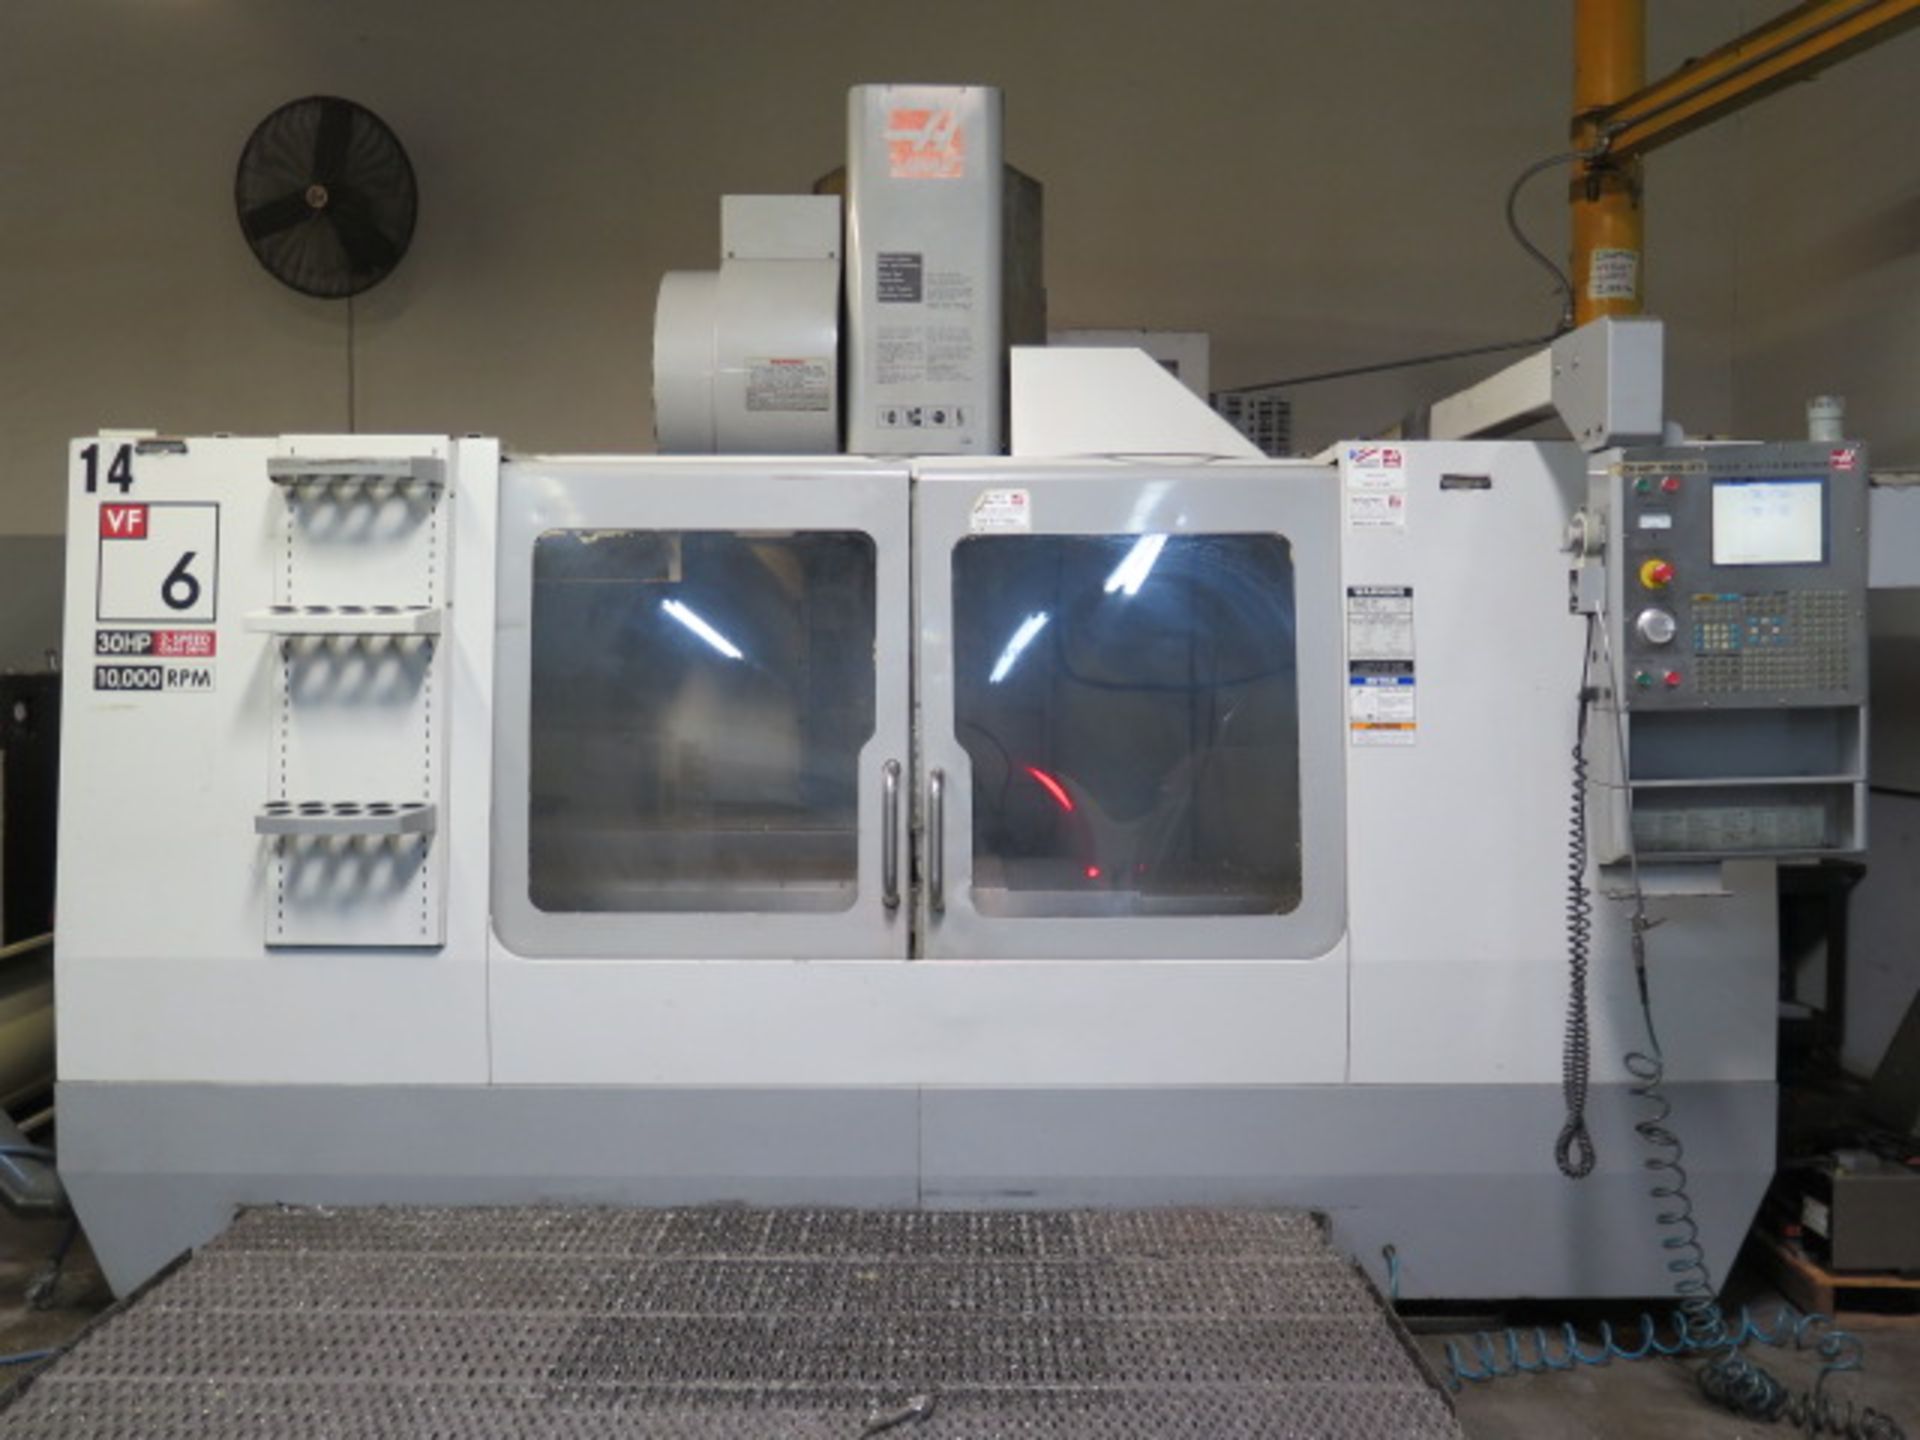 Ultra Precision “HAAS” CNC Machining & Turning Facility - Image 18 of 18